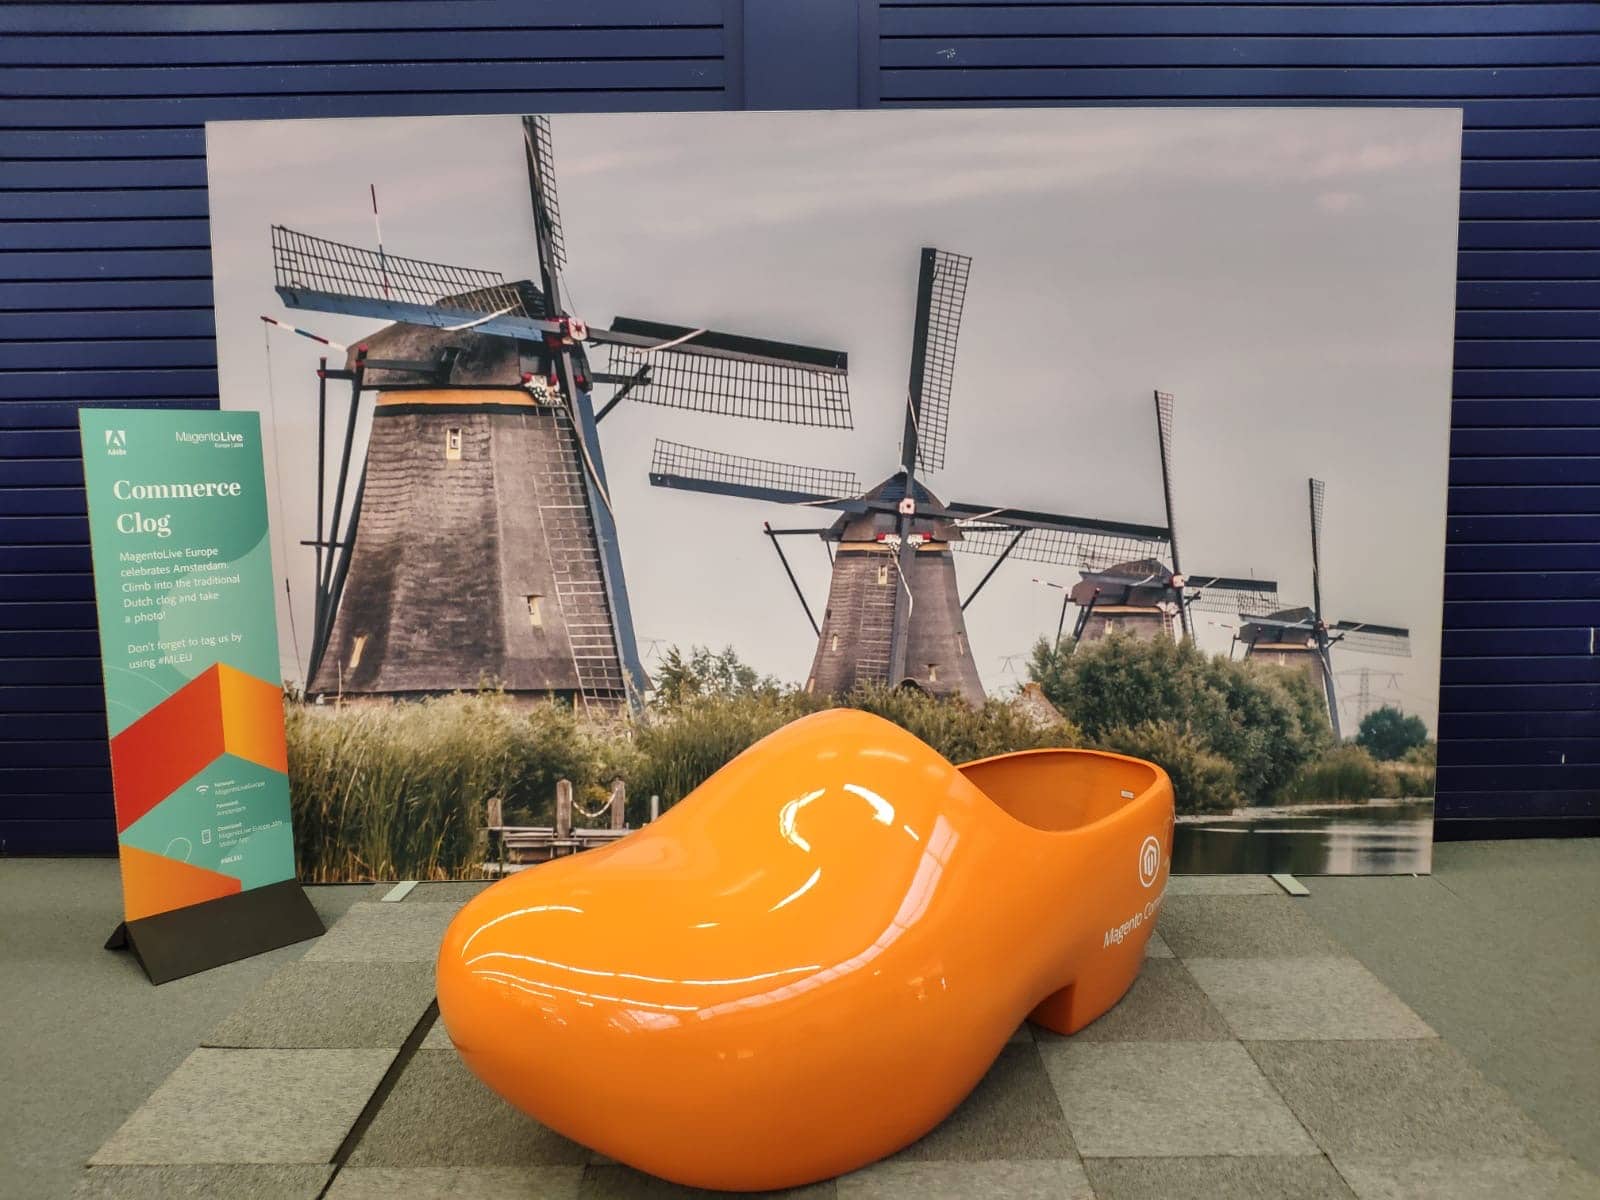 MLEU 2019: Our Roundup from Amsterdam